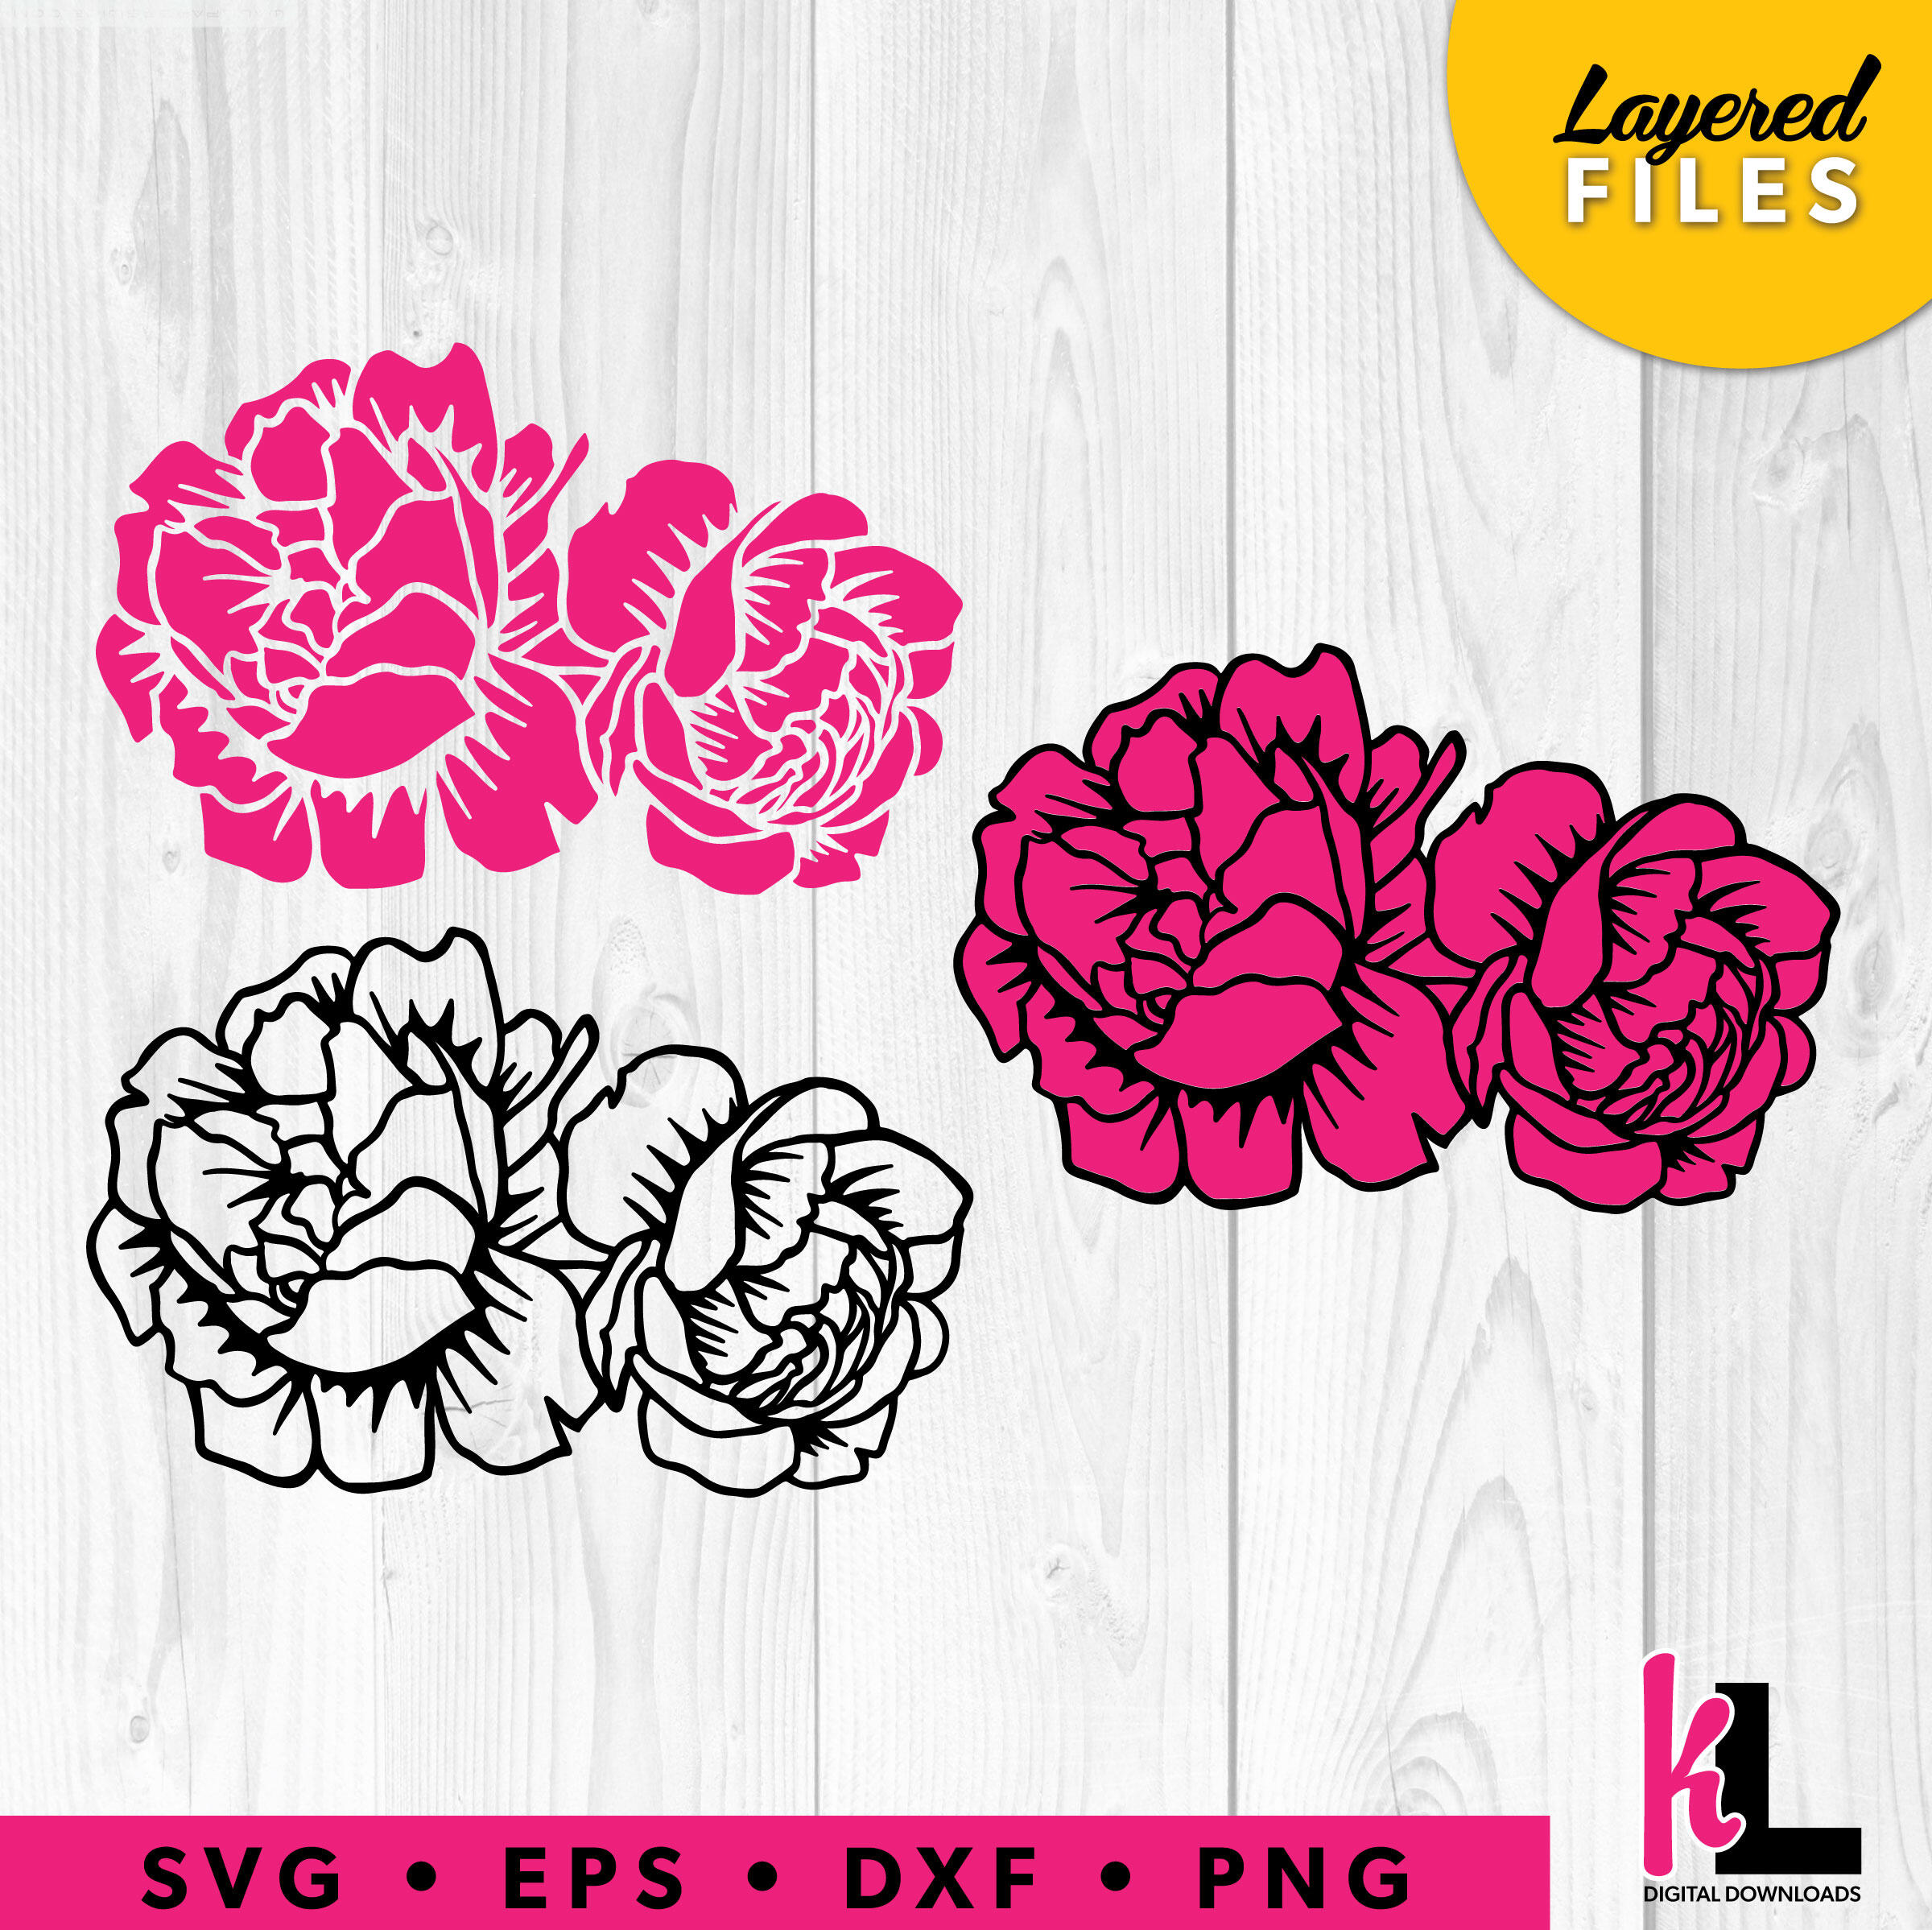 Download Handmade Supplies Clip Art Image Files Peonies Svg Layered Floral Svg Bundle Peony Vector Wedding Peonies Cut File For Cricut Sihouette Flowers For Vinyl Peony Clipart